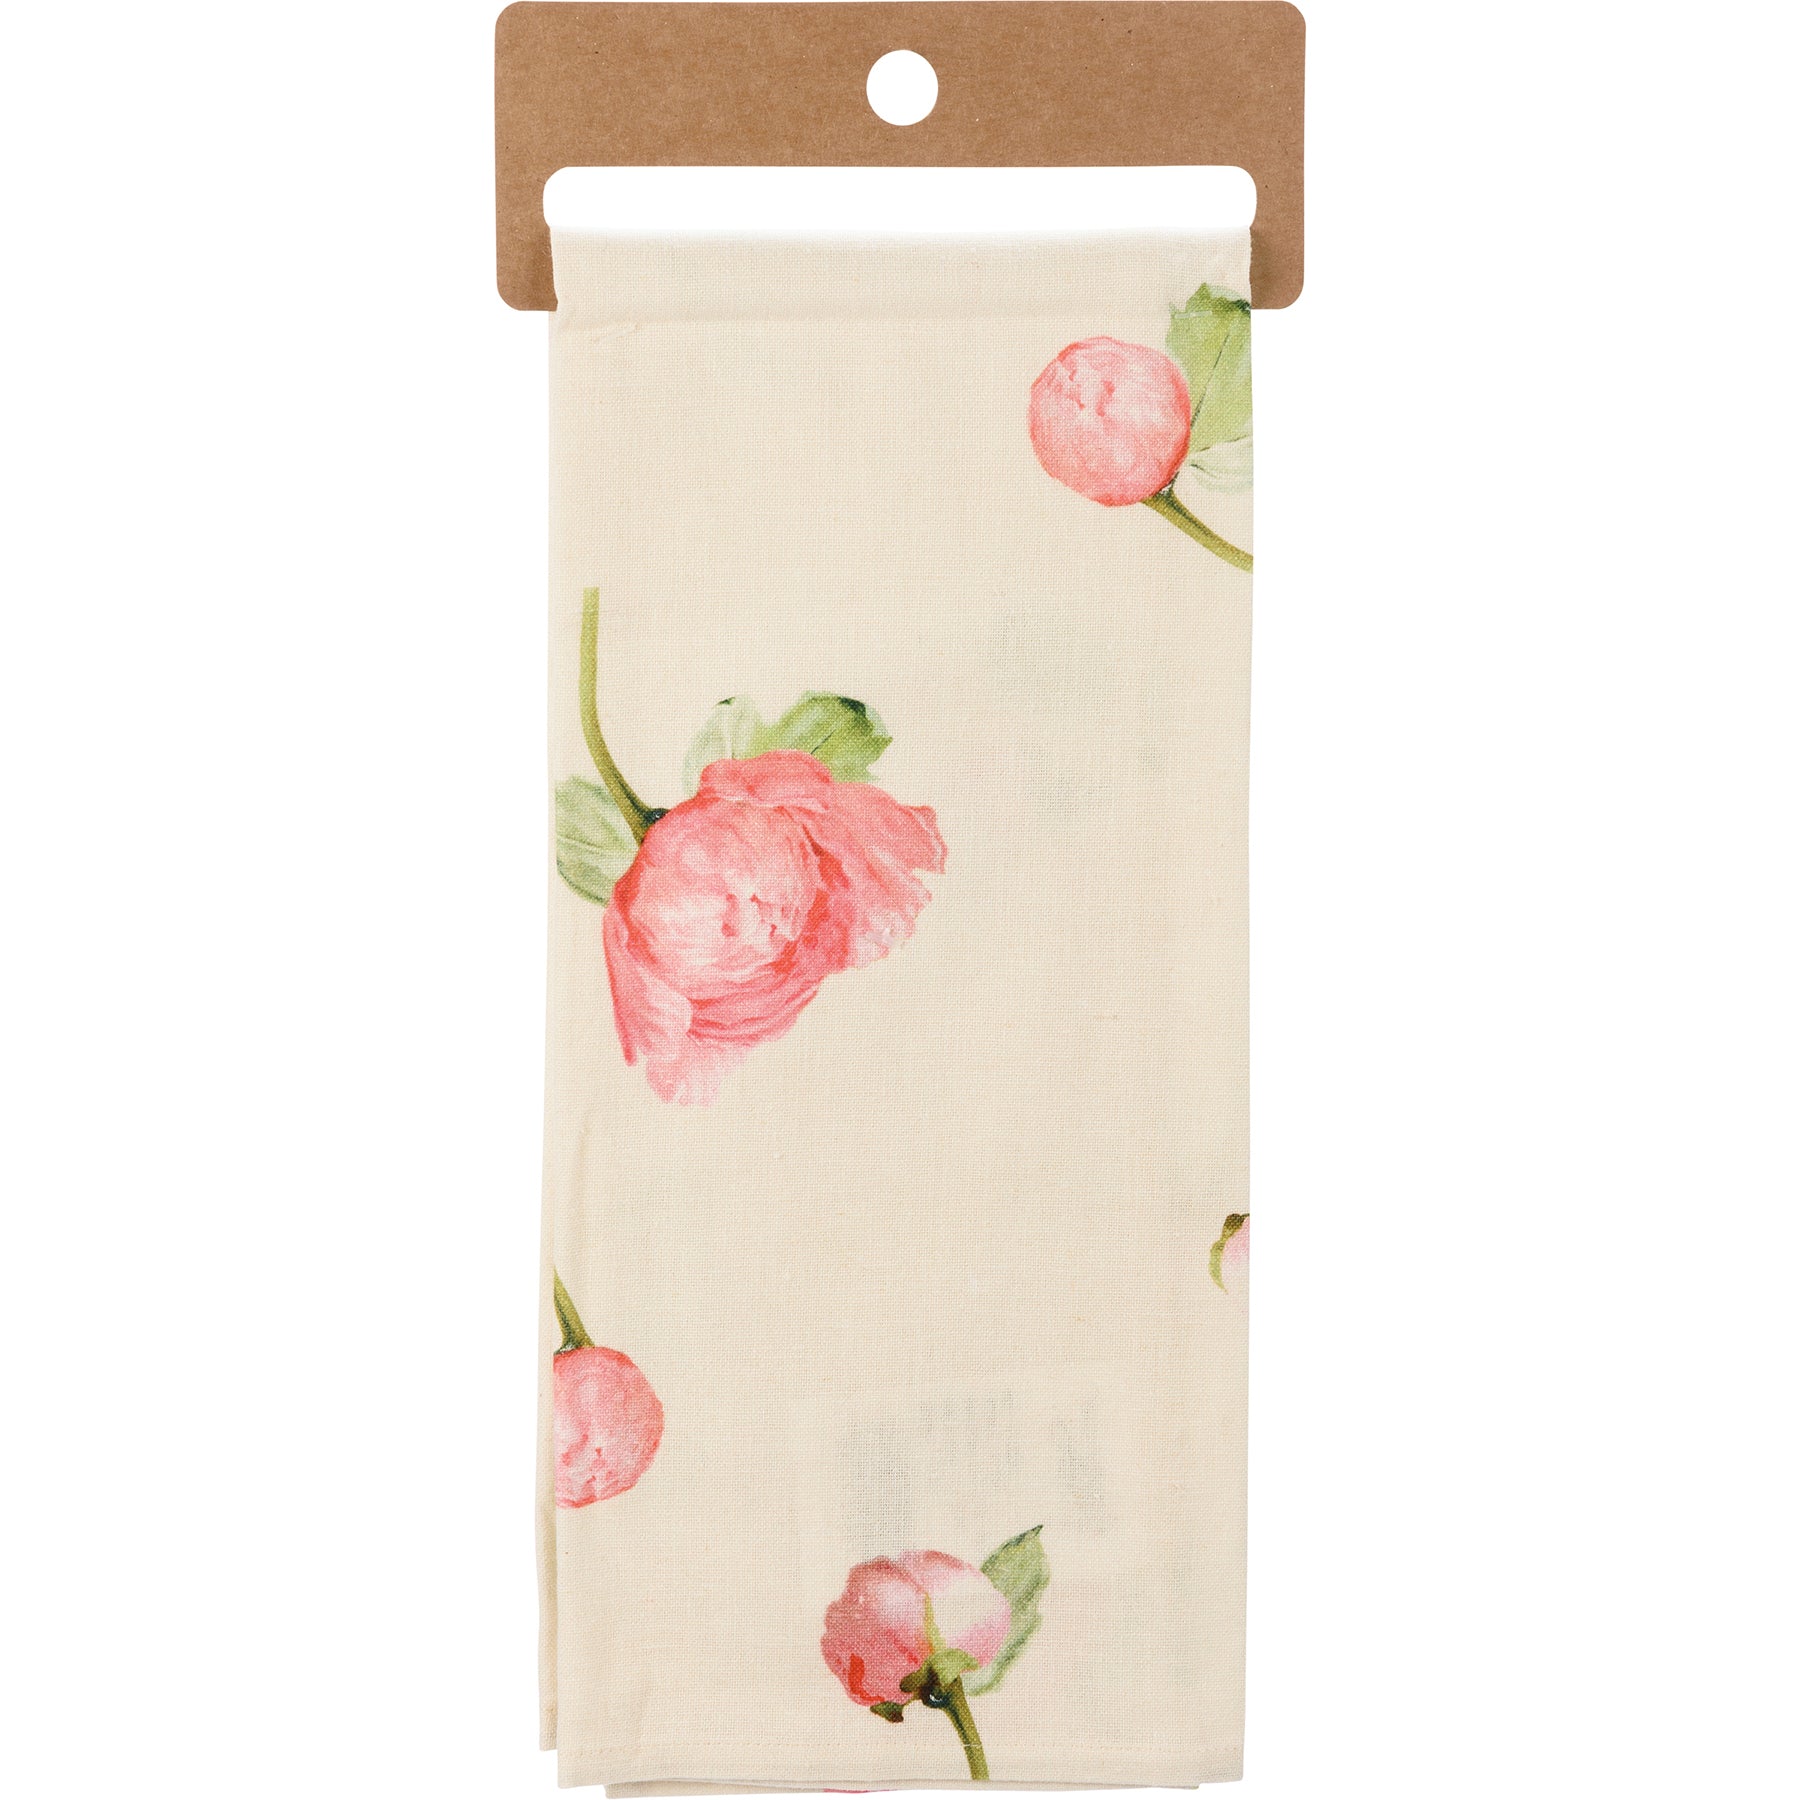 Peony For Your Thoughts Dish Cloth Towel | Cotten Linen Novelty Tea Towel | Cute Kitchen Hand Towel | 18" x 28"